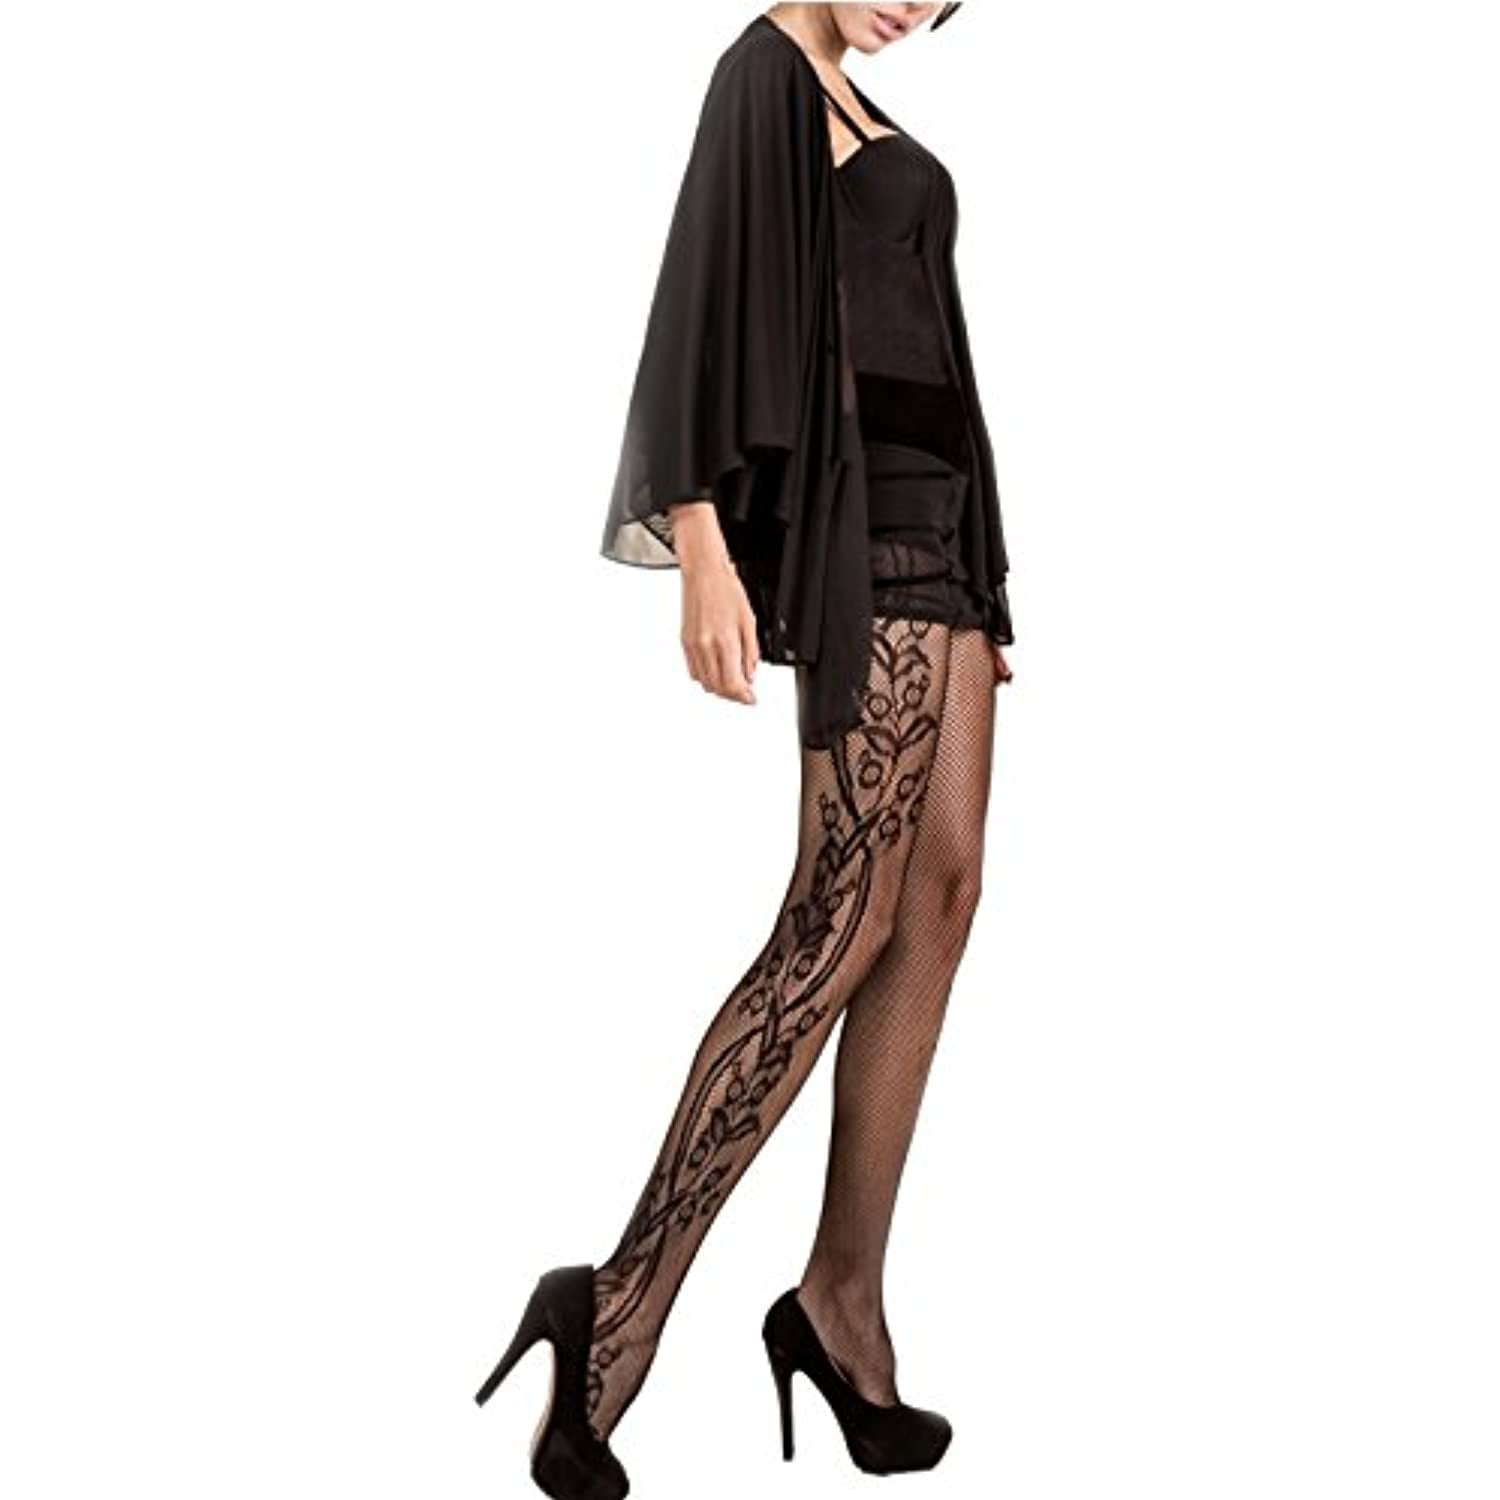 NEW KILLER LEGS BLACK VICTORIAN PRINTED FLORAL FISHNET TIGHTS-ONE SIZE-168YD040 